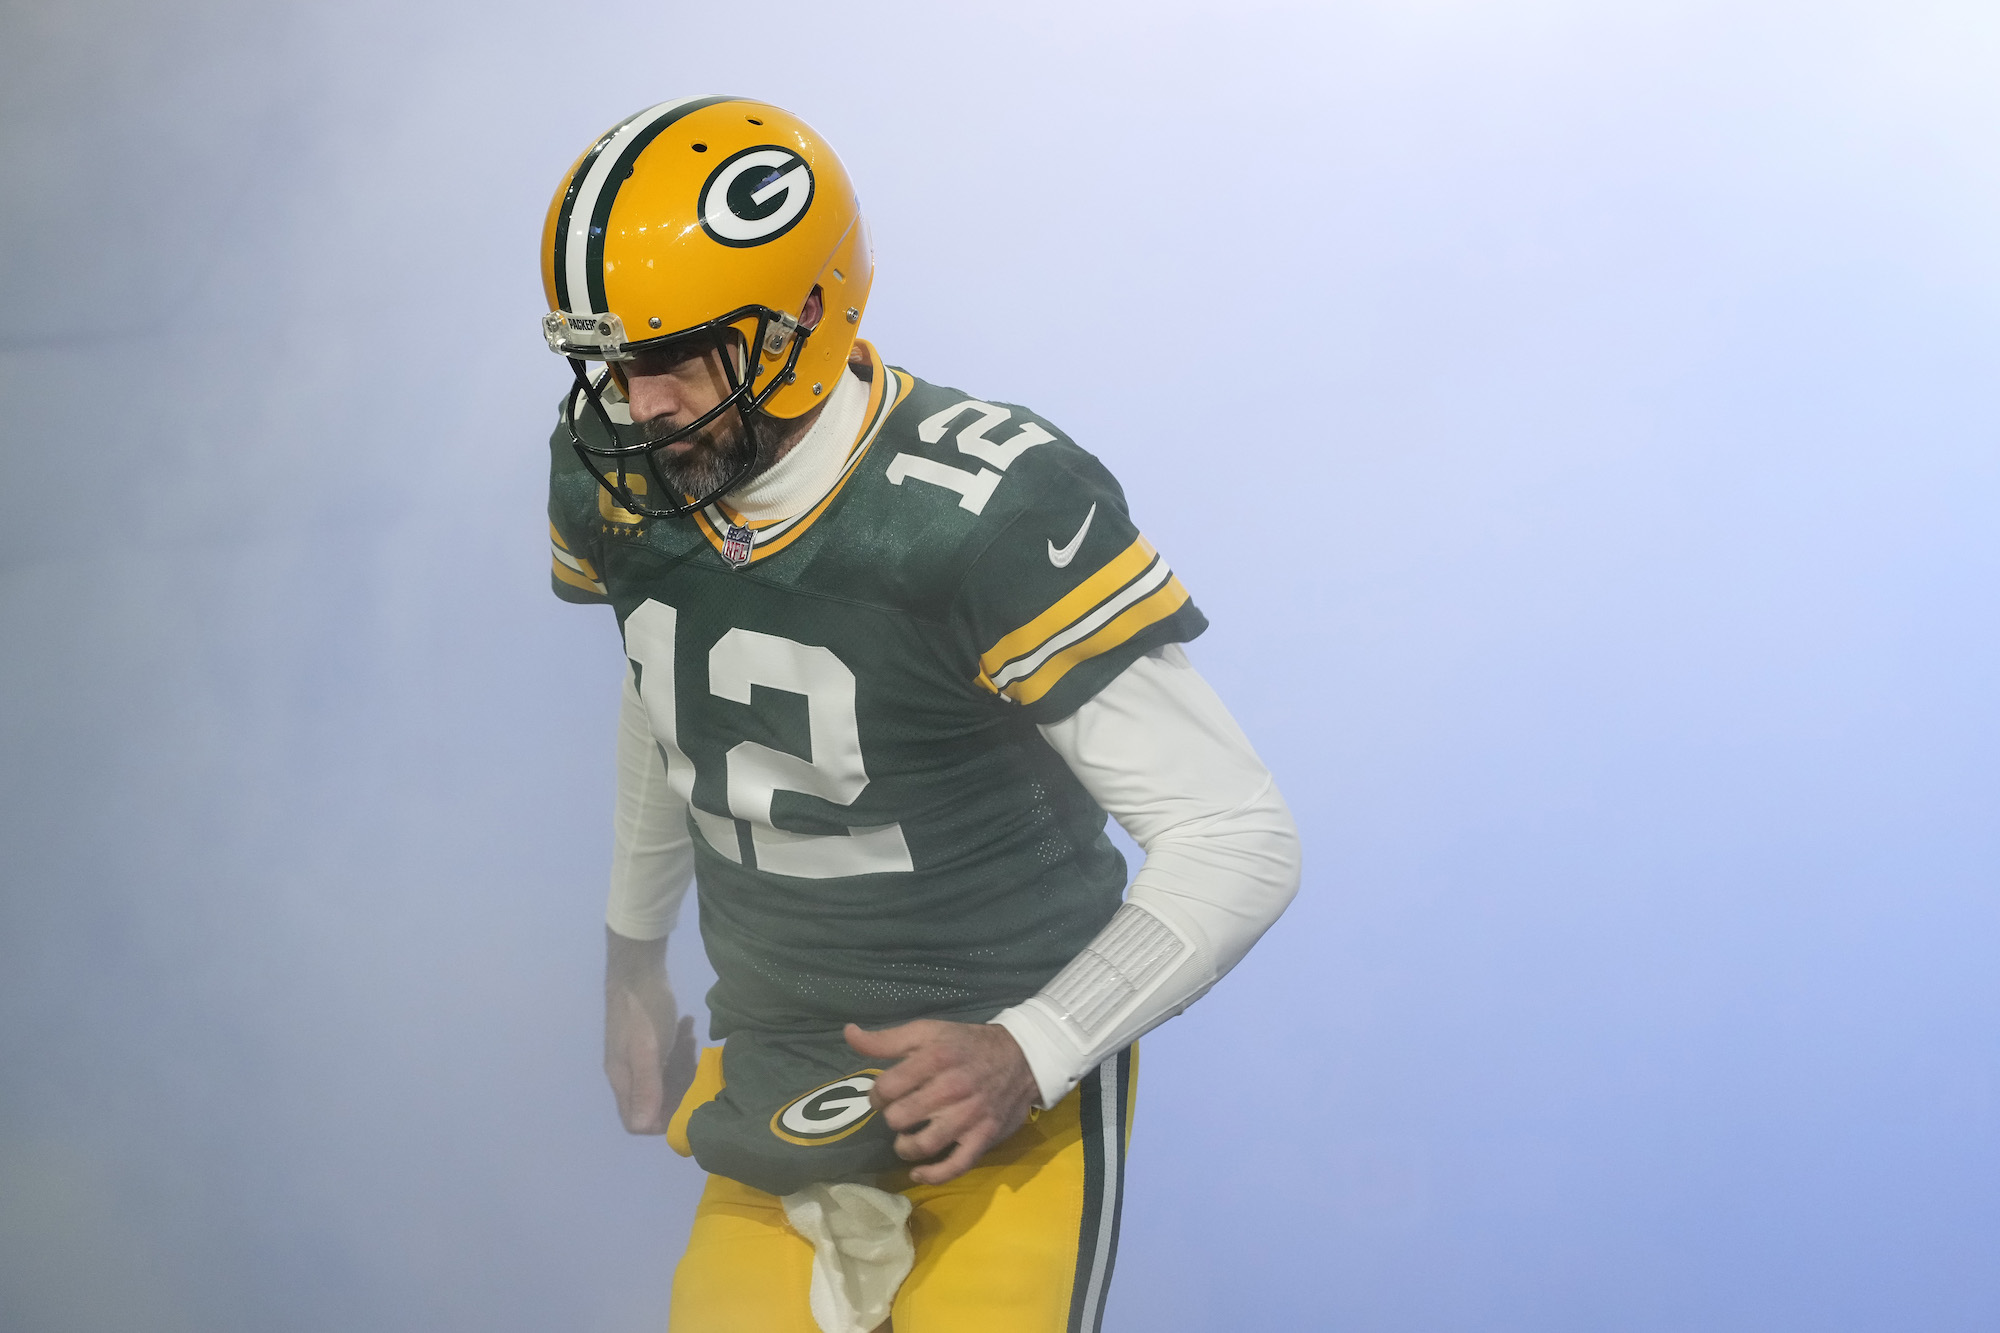 GREEN BAY, WISCONSIN - JANUARY 08: Aaron Rodgers #12 of the Green Bay Packers runs onto the field before a game against the Detroit Lions at Lambeau Field on January 08, 2023 in Green Bay, Wisconsin. (Photo by Patrick McDermott/Getty Images)